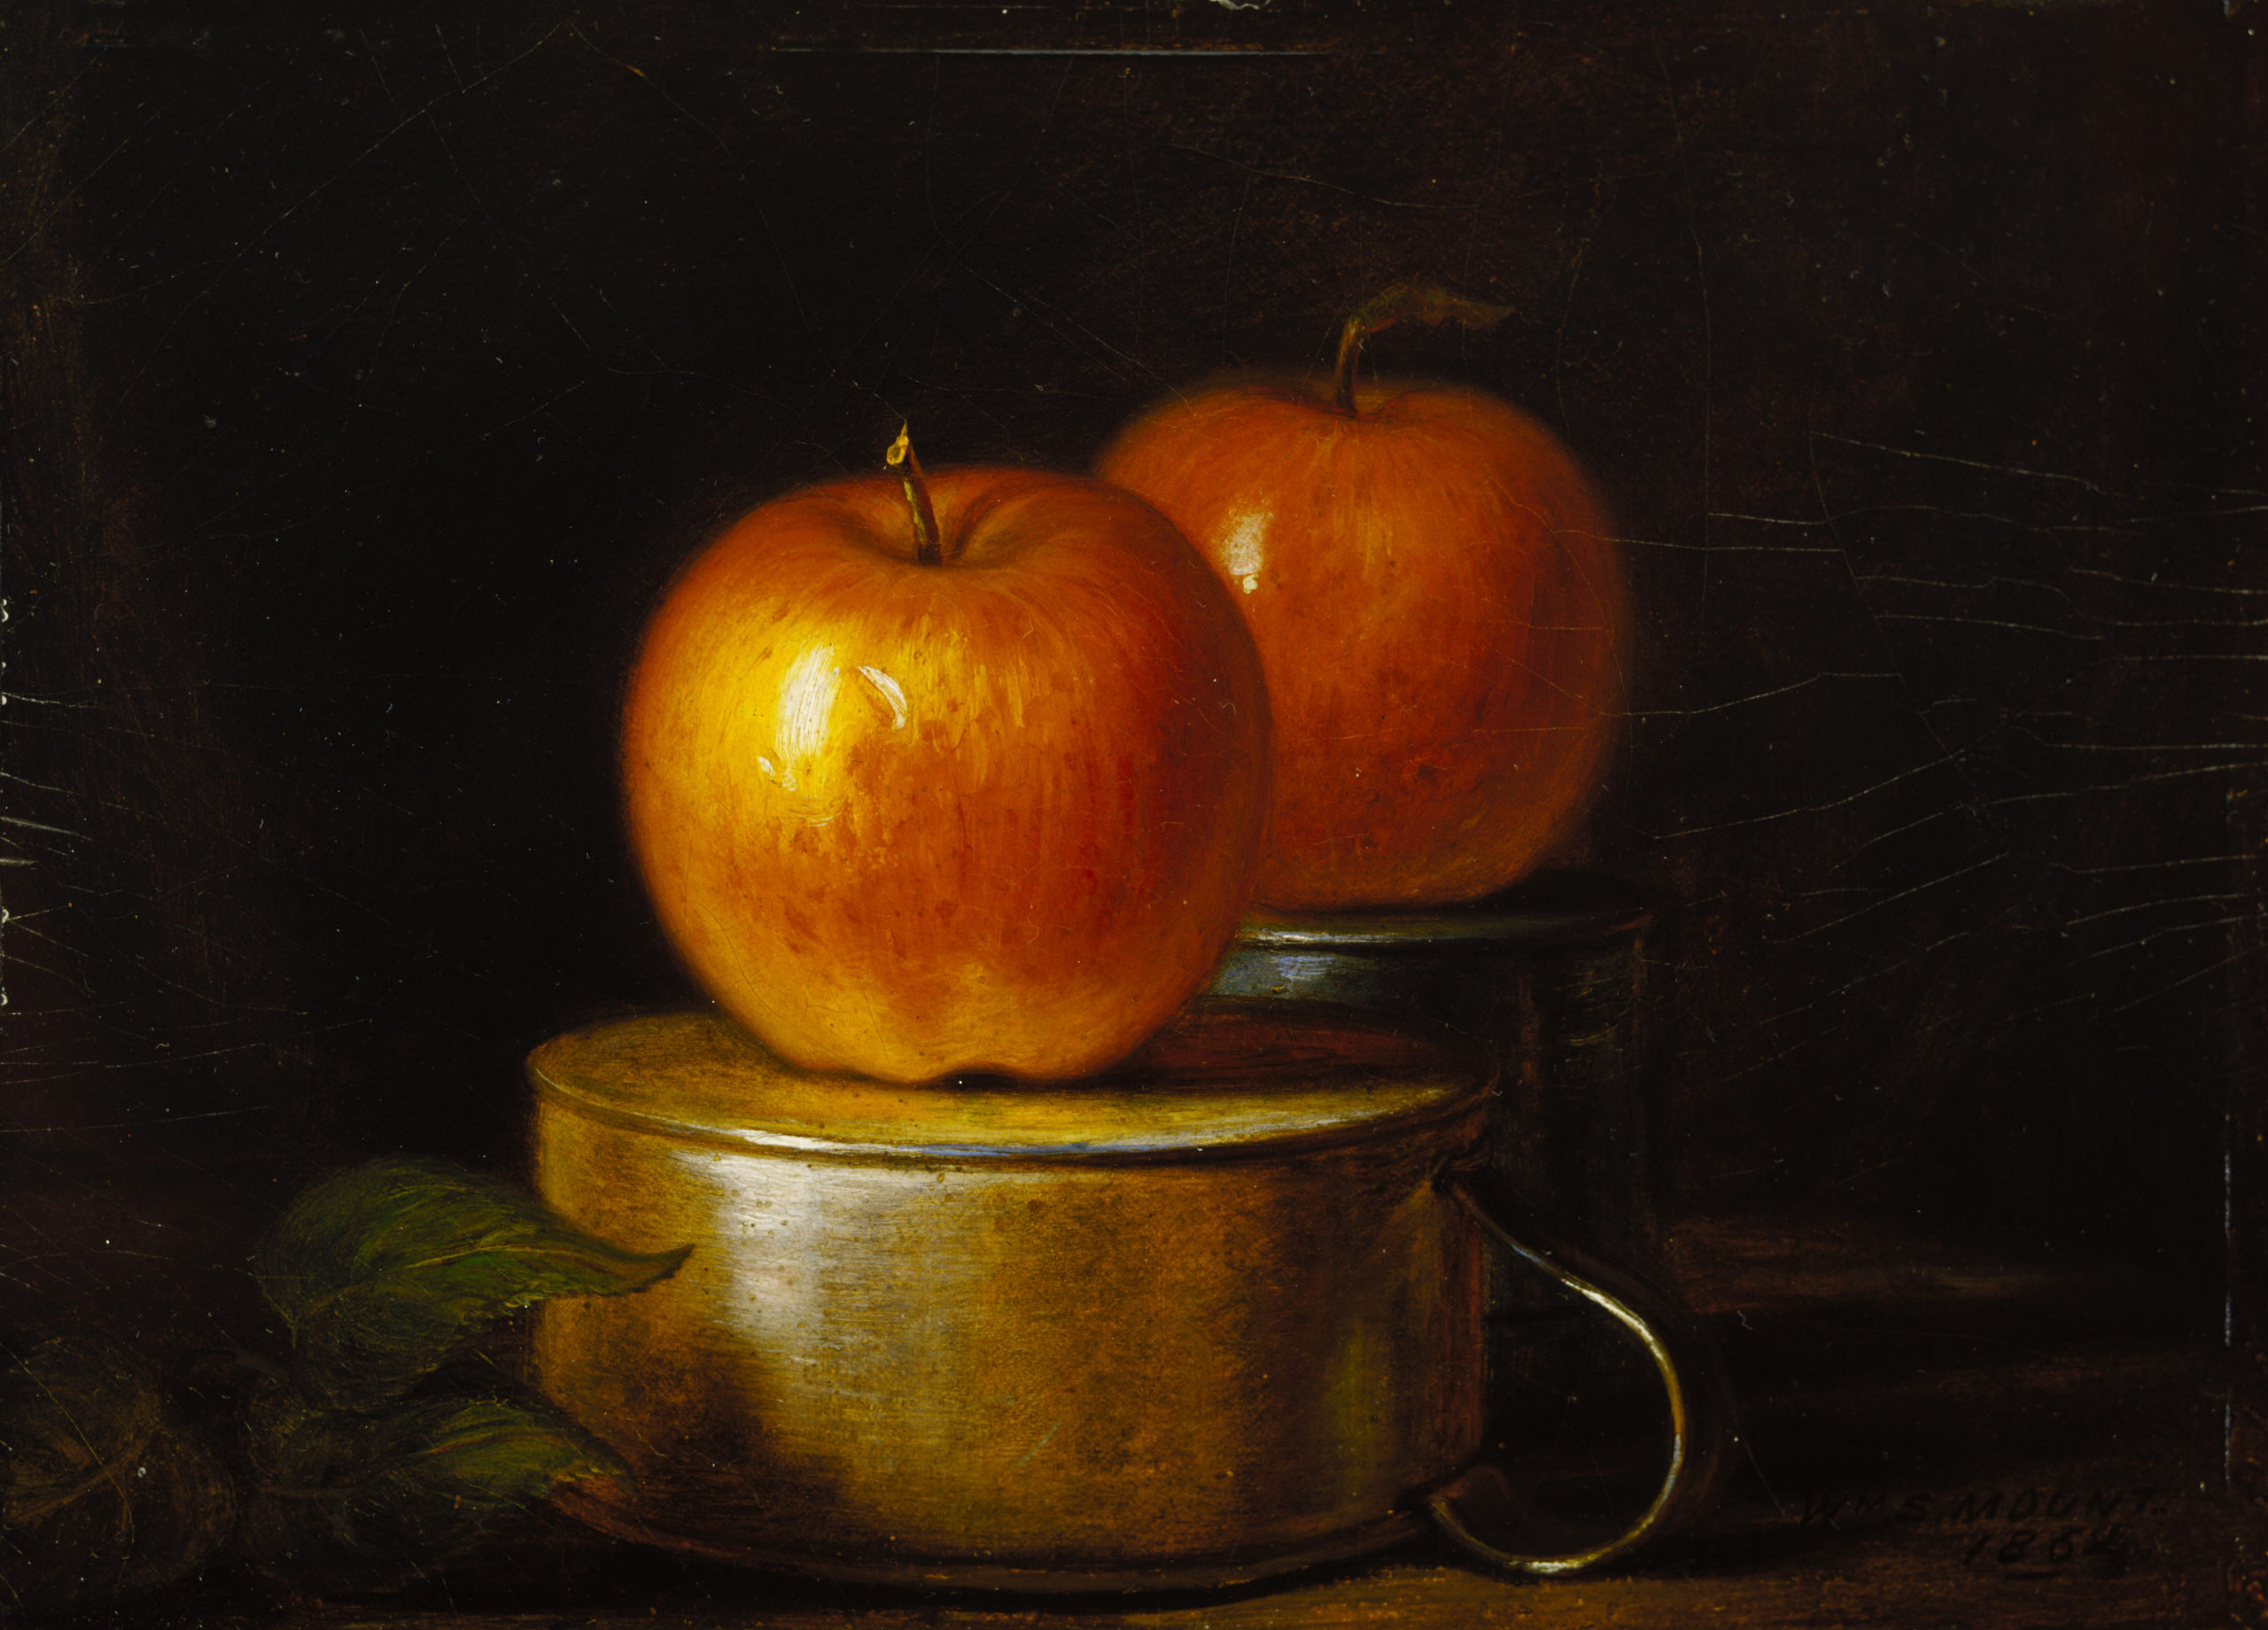 William Sidney Mount, Fruit Piece: Apples on Tin Cups, 1864, oil on academy board, 6 1/2 x 9 1/16 inches (Terra Foundation for American Art)